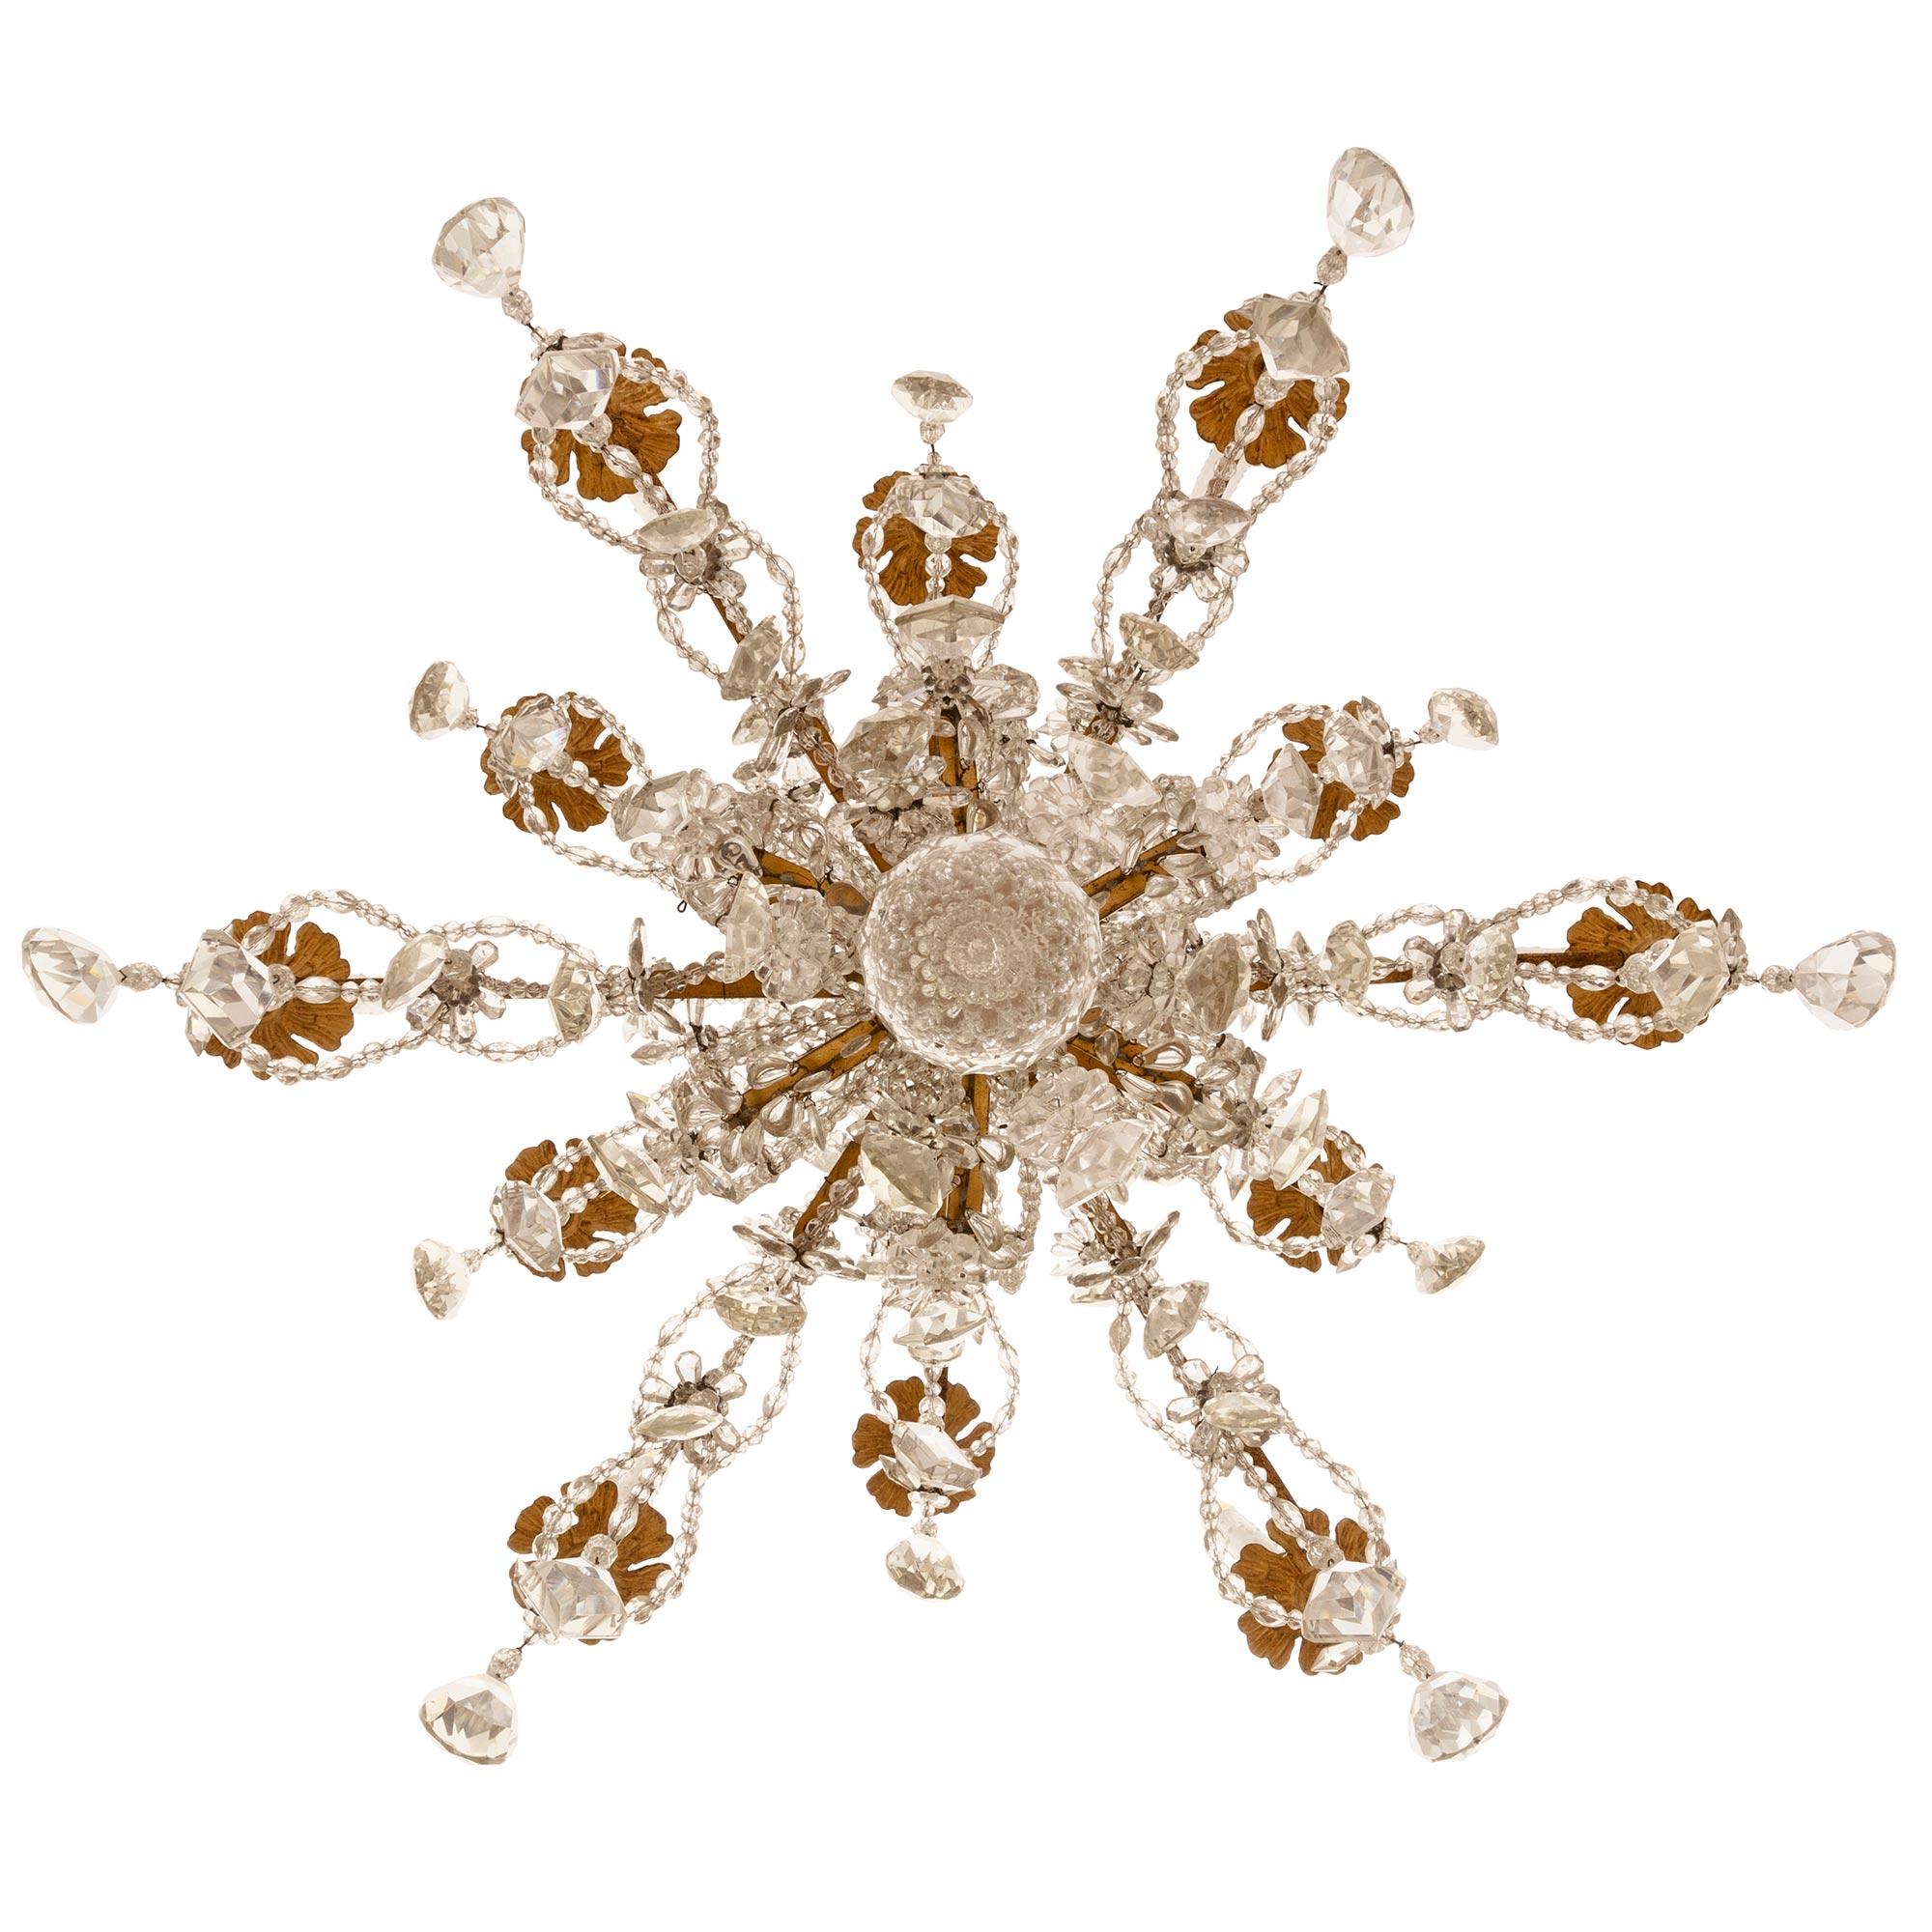 An extremely elegant and high quality Italian early 19th century crystal chandelier from the Turin region. The chandelier has twelve lights on two levels centered at the bottom by a crystal ball pendant. Each elaborately scrolled gilt metal arm is